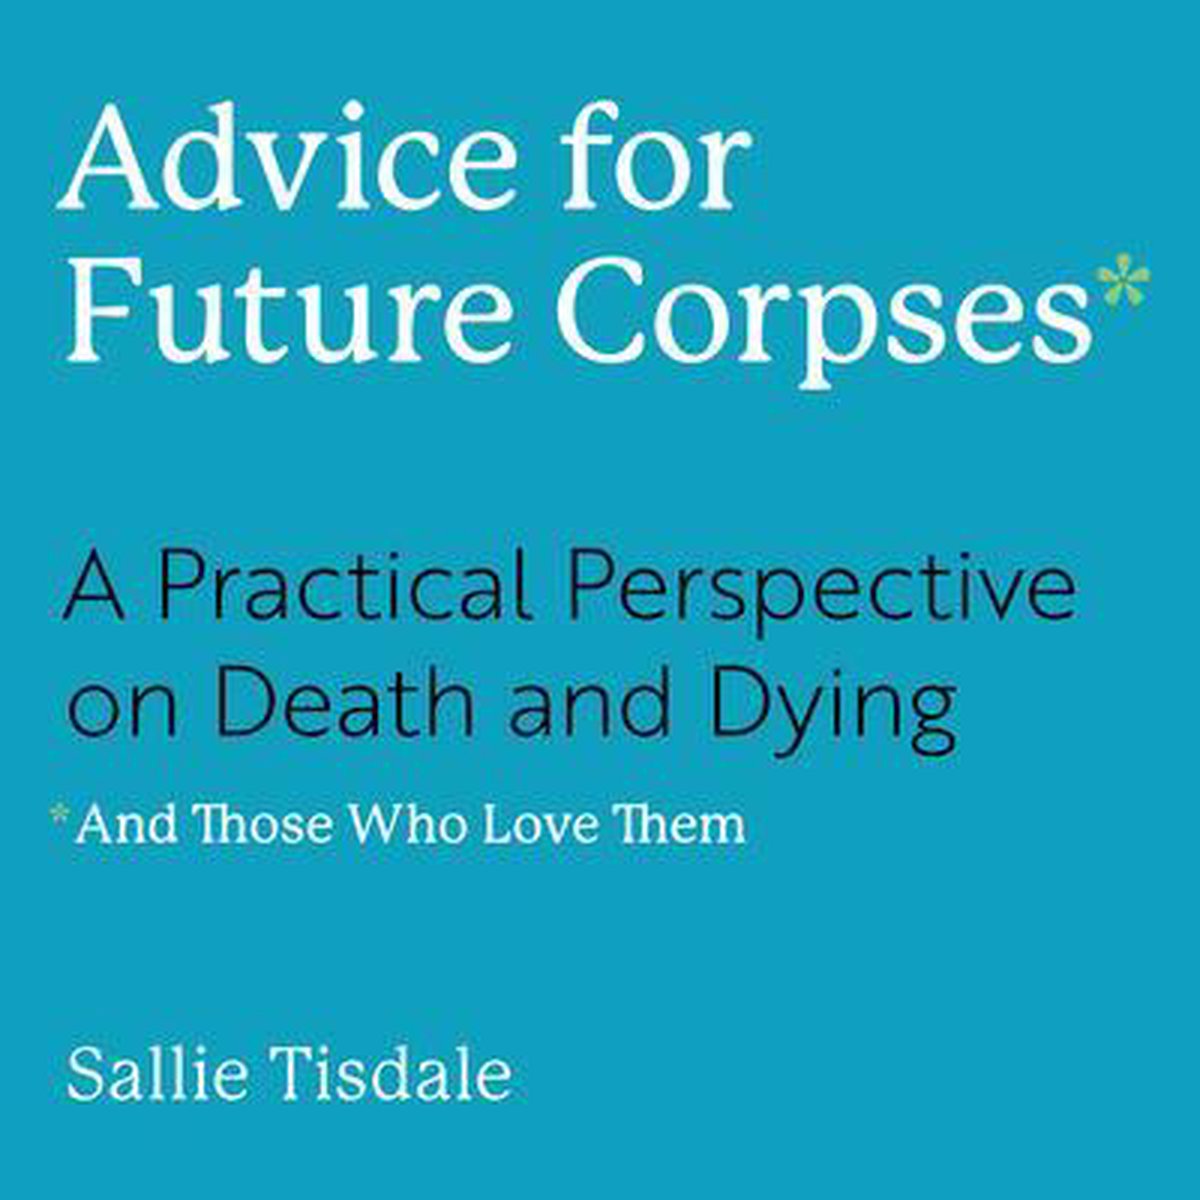 Advice for Future Corpses (and Those Who Love Them) - Sallie Tisdale